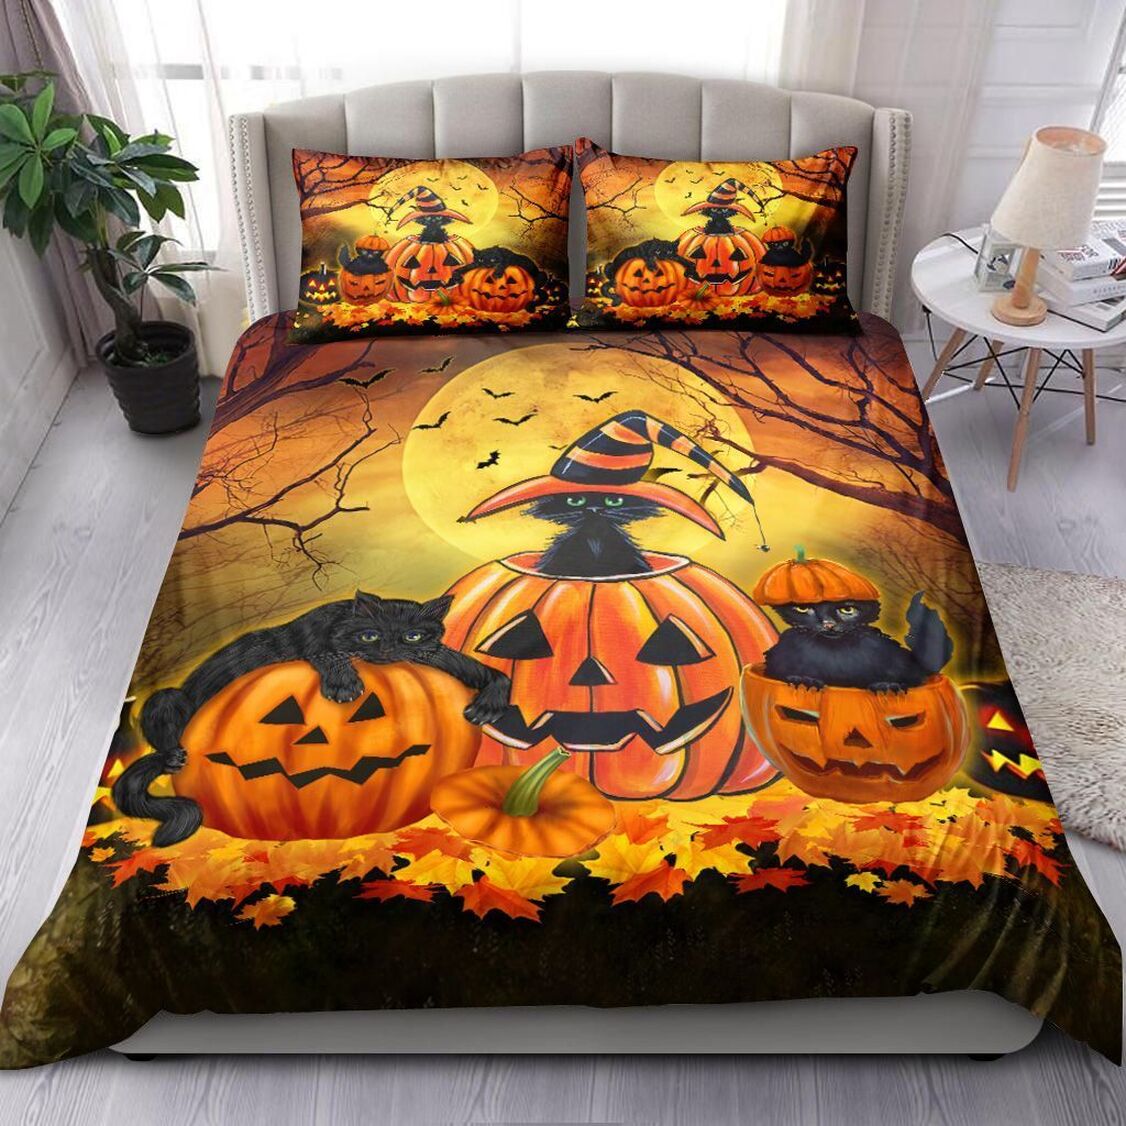 Black Cat And Pumpkin Quilt Bedding Set - Happy Halloween Quilt Bedroom Decor With 2 Pillowcases